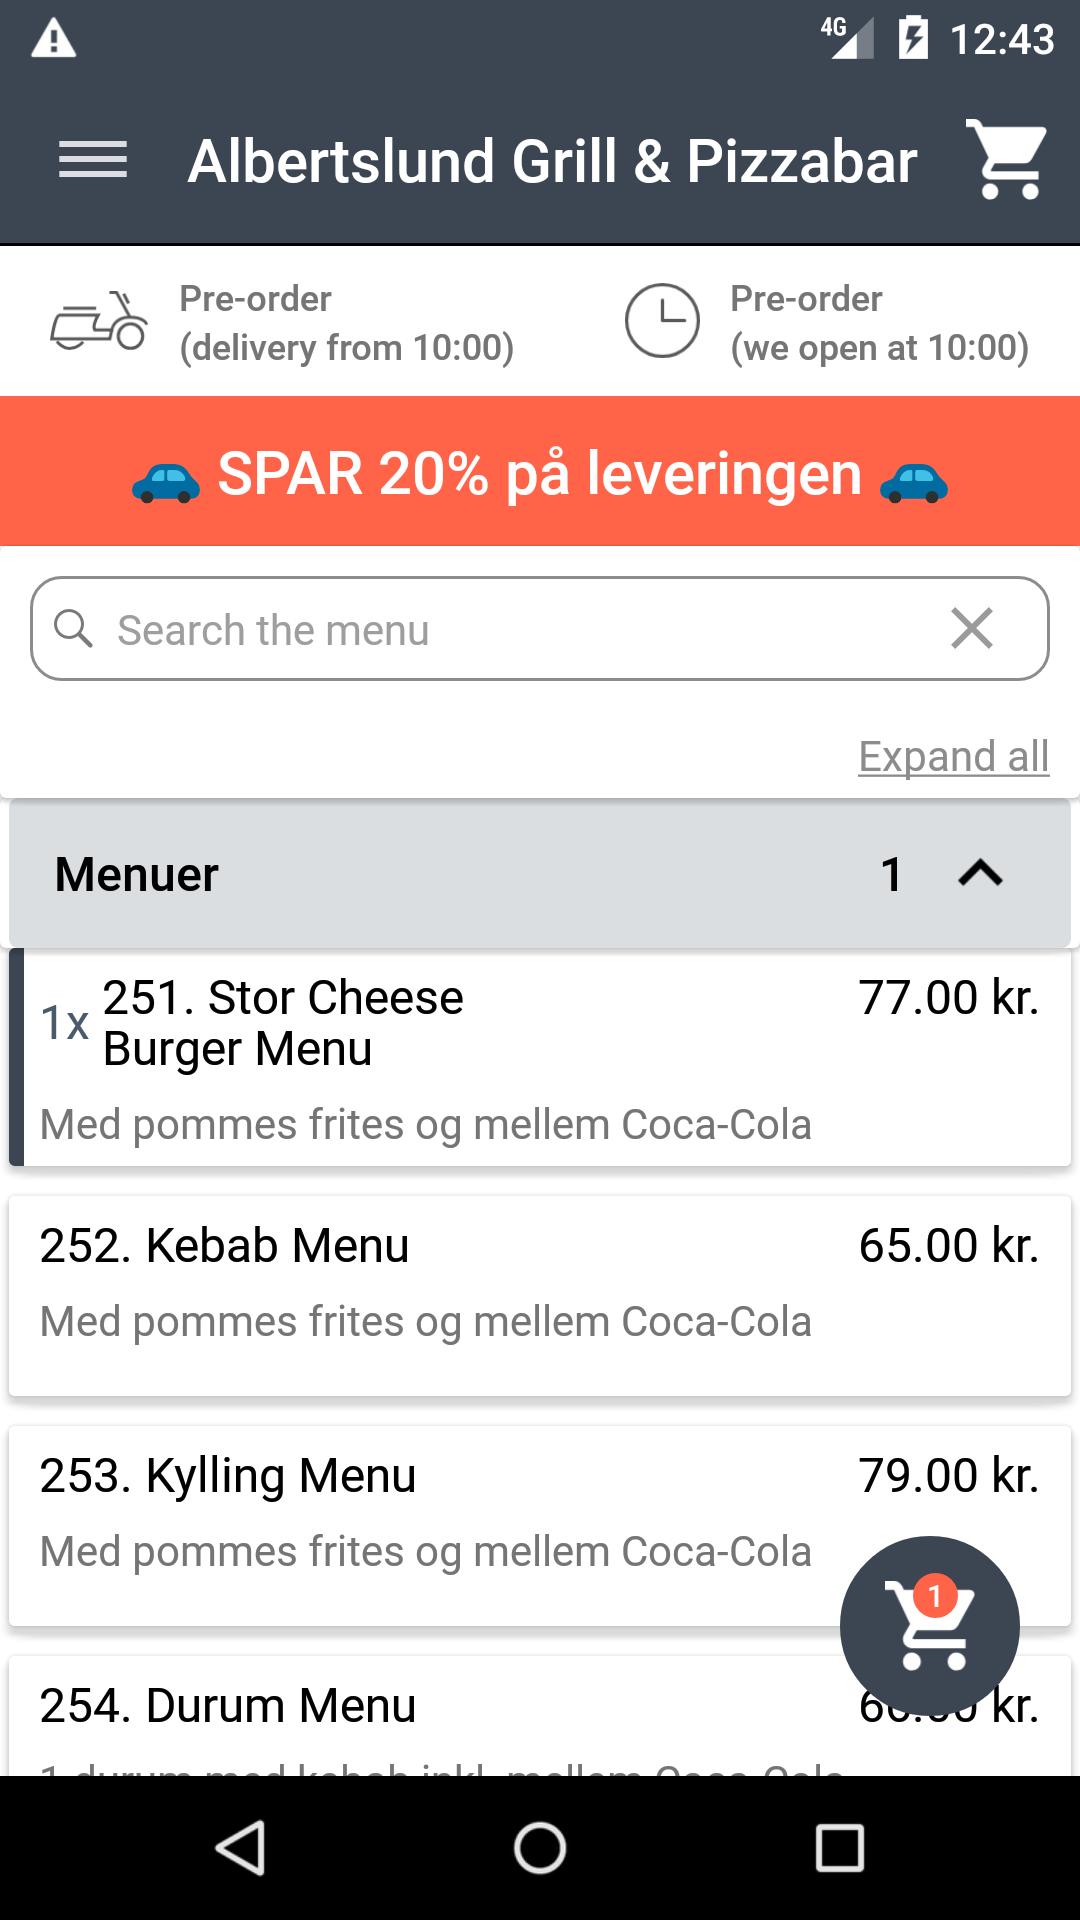 Albertslund Grill & Pizzabar for Android - APK Download